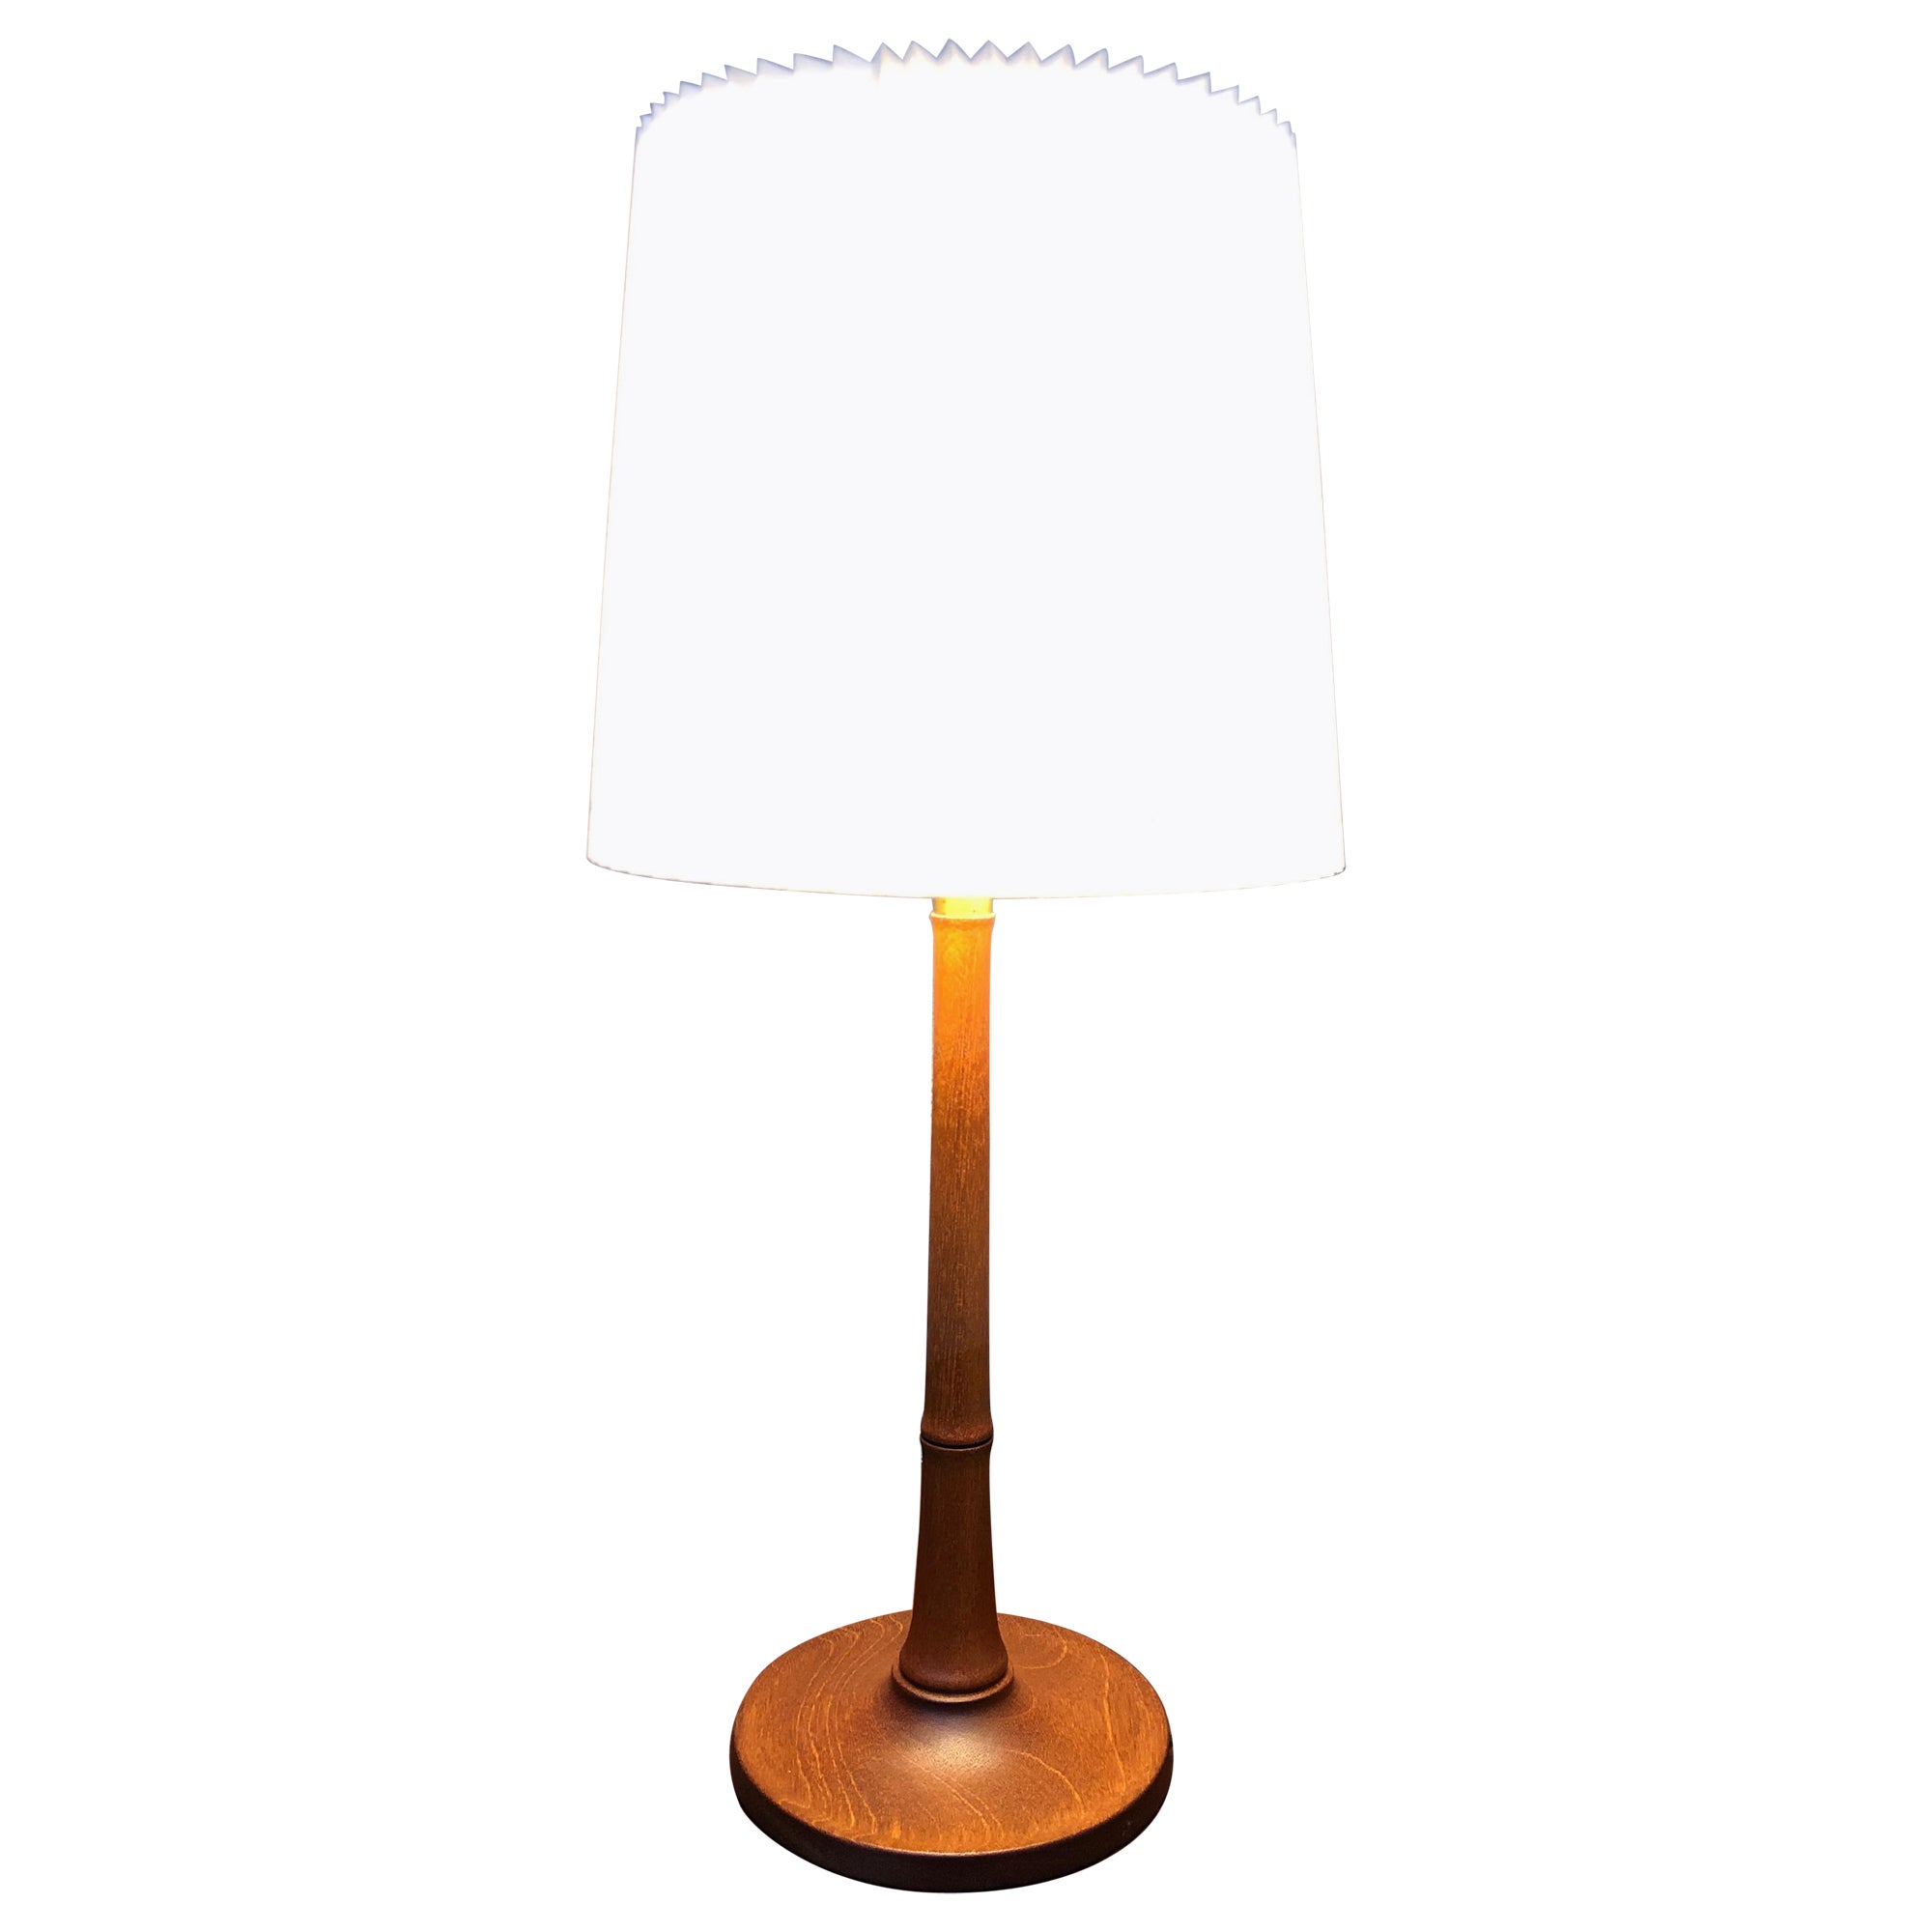 A Vintage Teak Table Lamp by Esben Klint for Le Klint from the 1940s For Sale